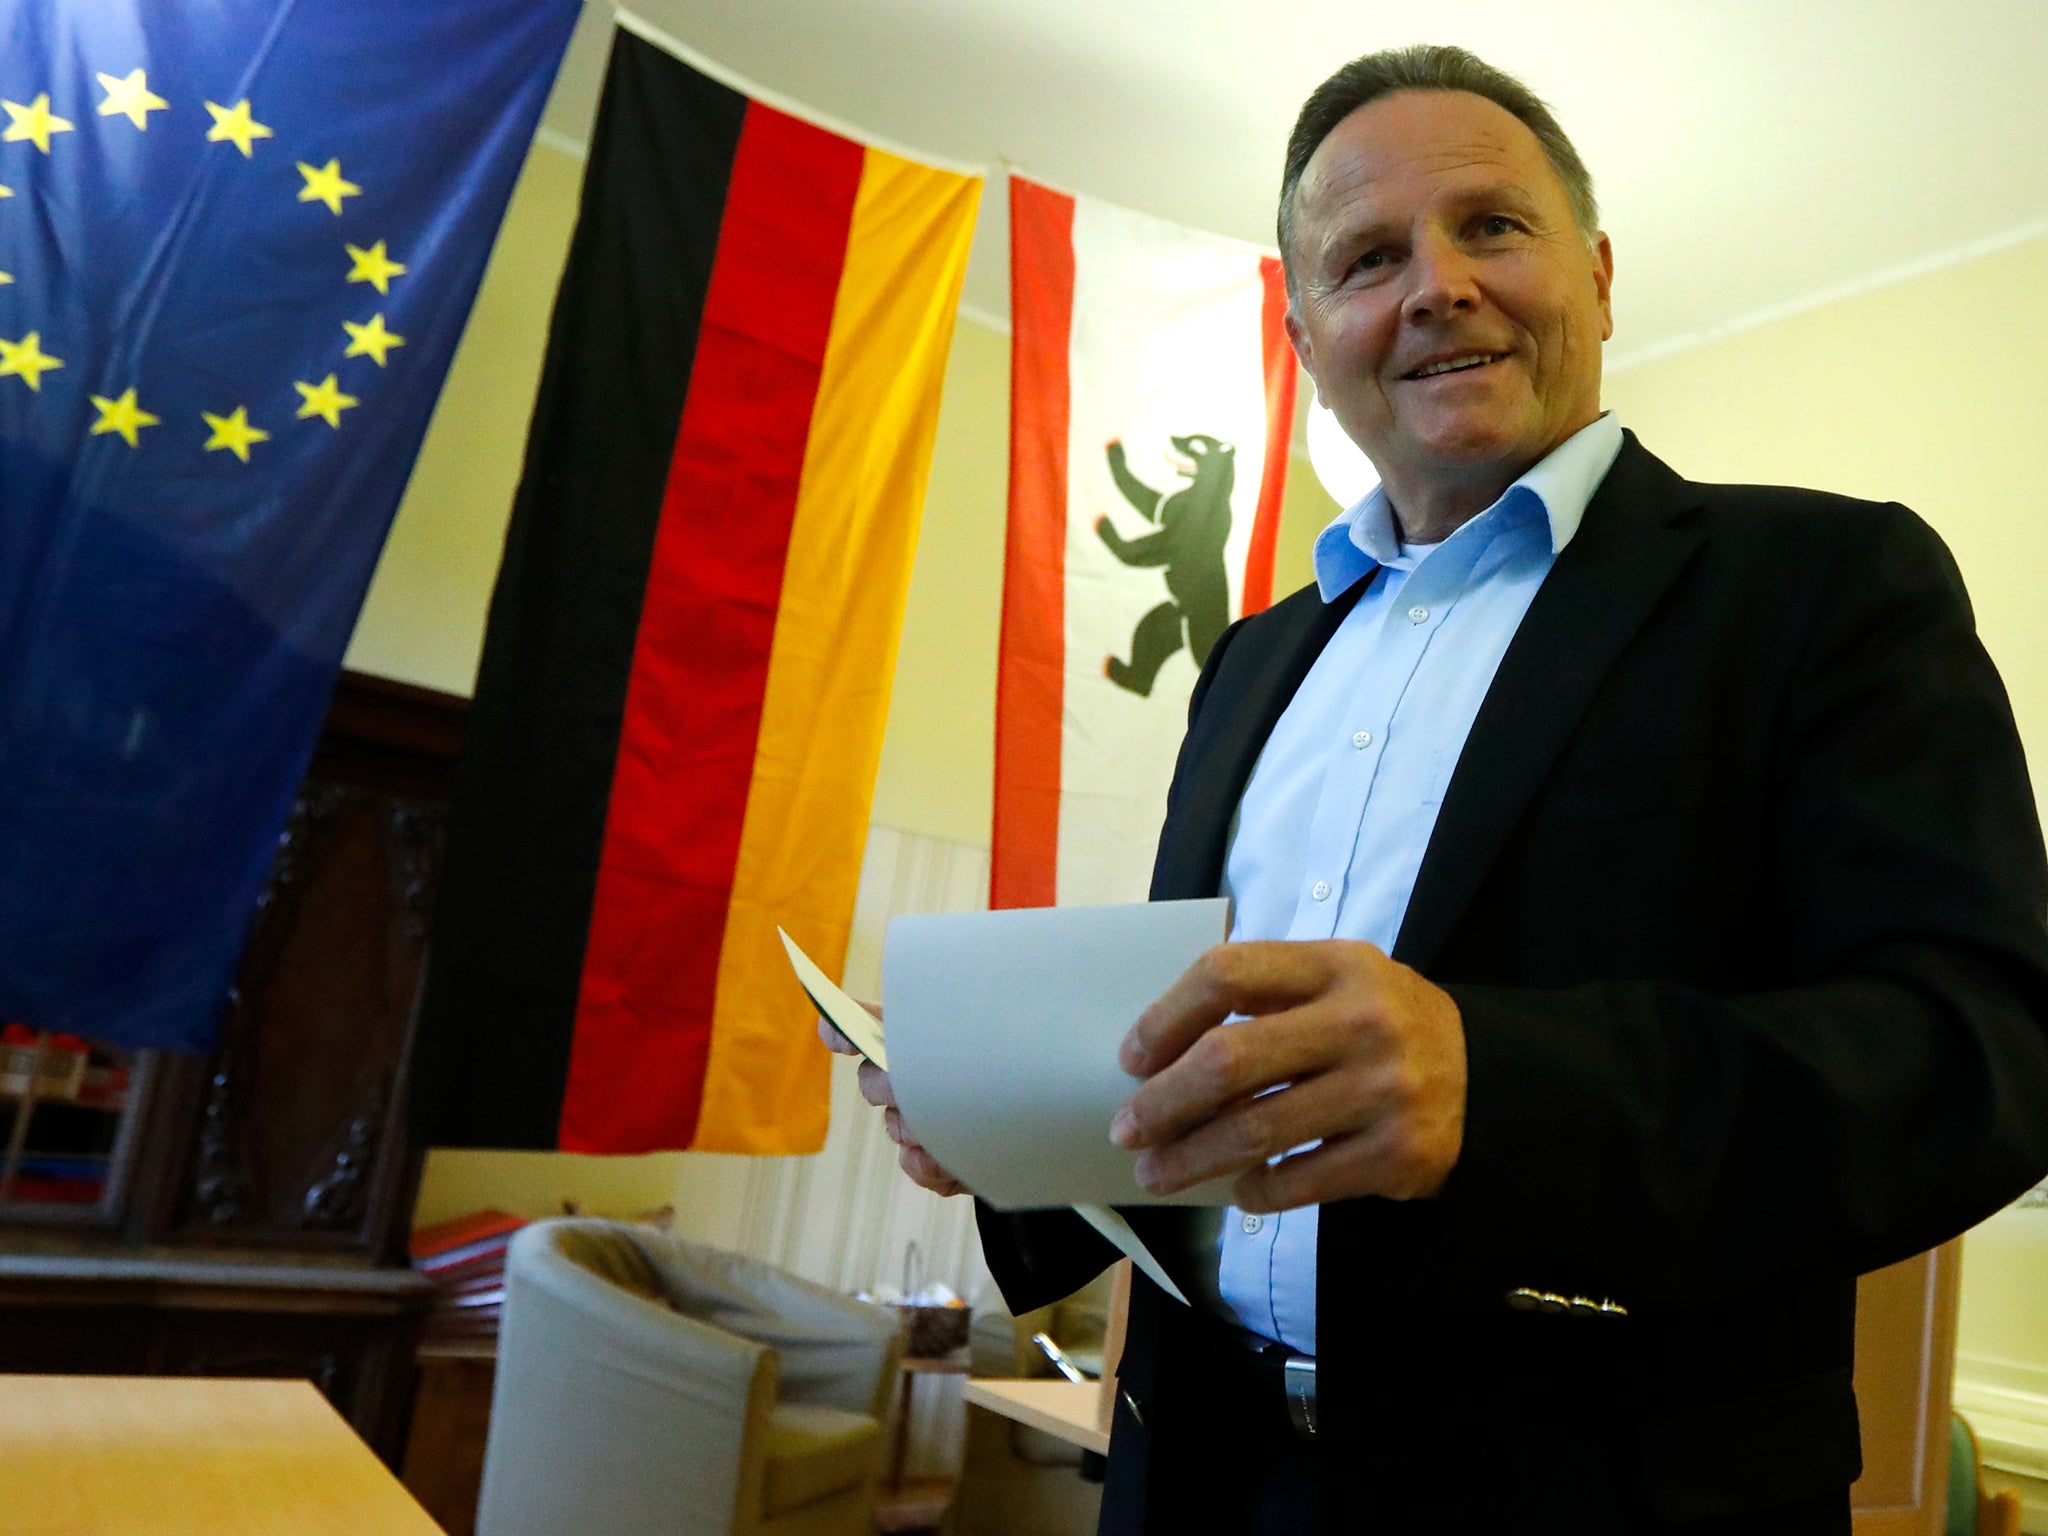 Top candidate of the anti-immigration party Alternative for Germany (AfD) Georg Pazderski casts his vote